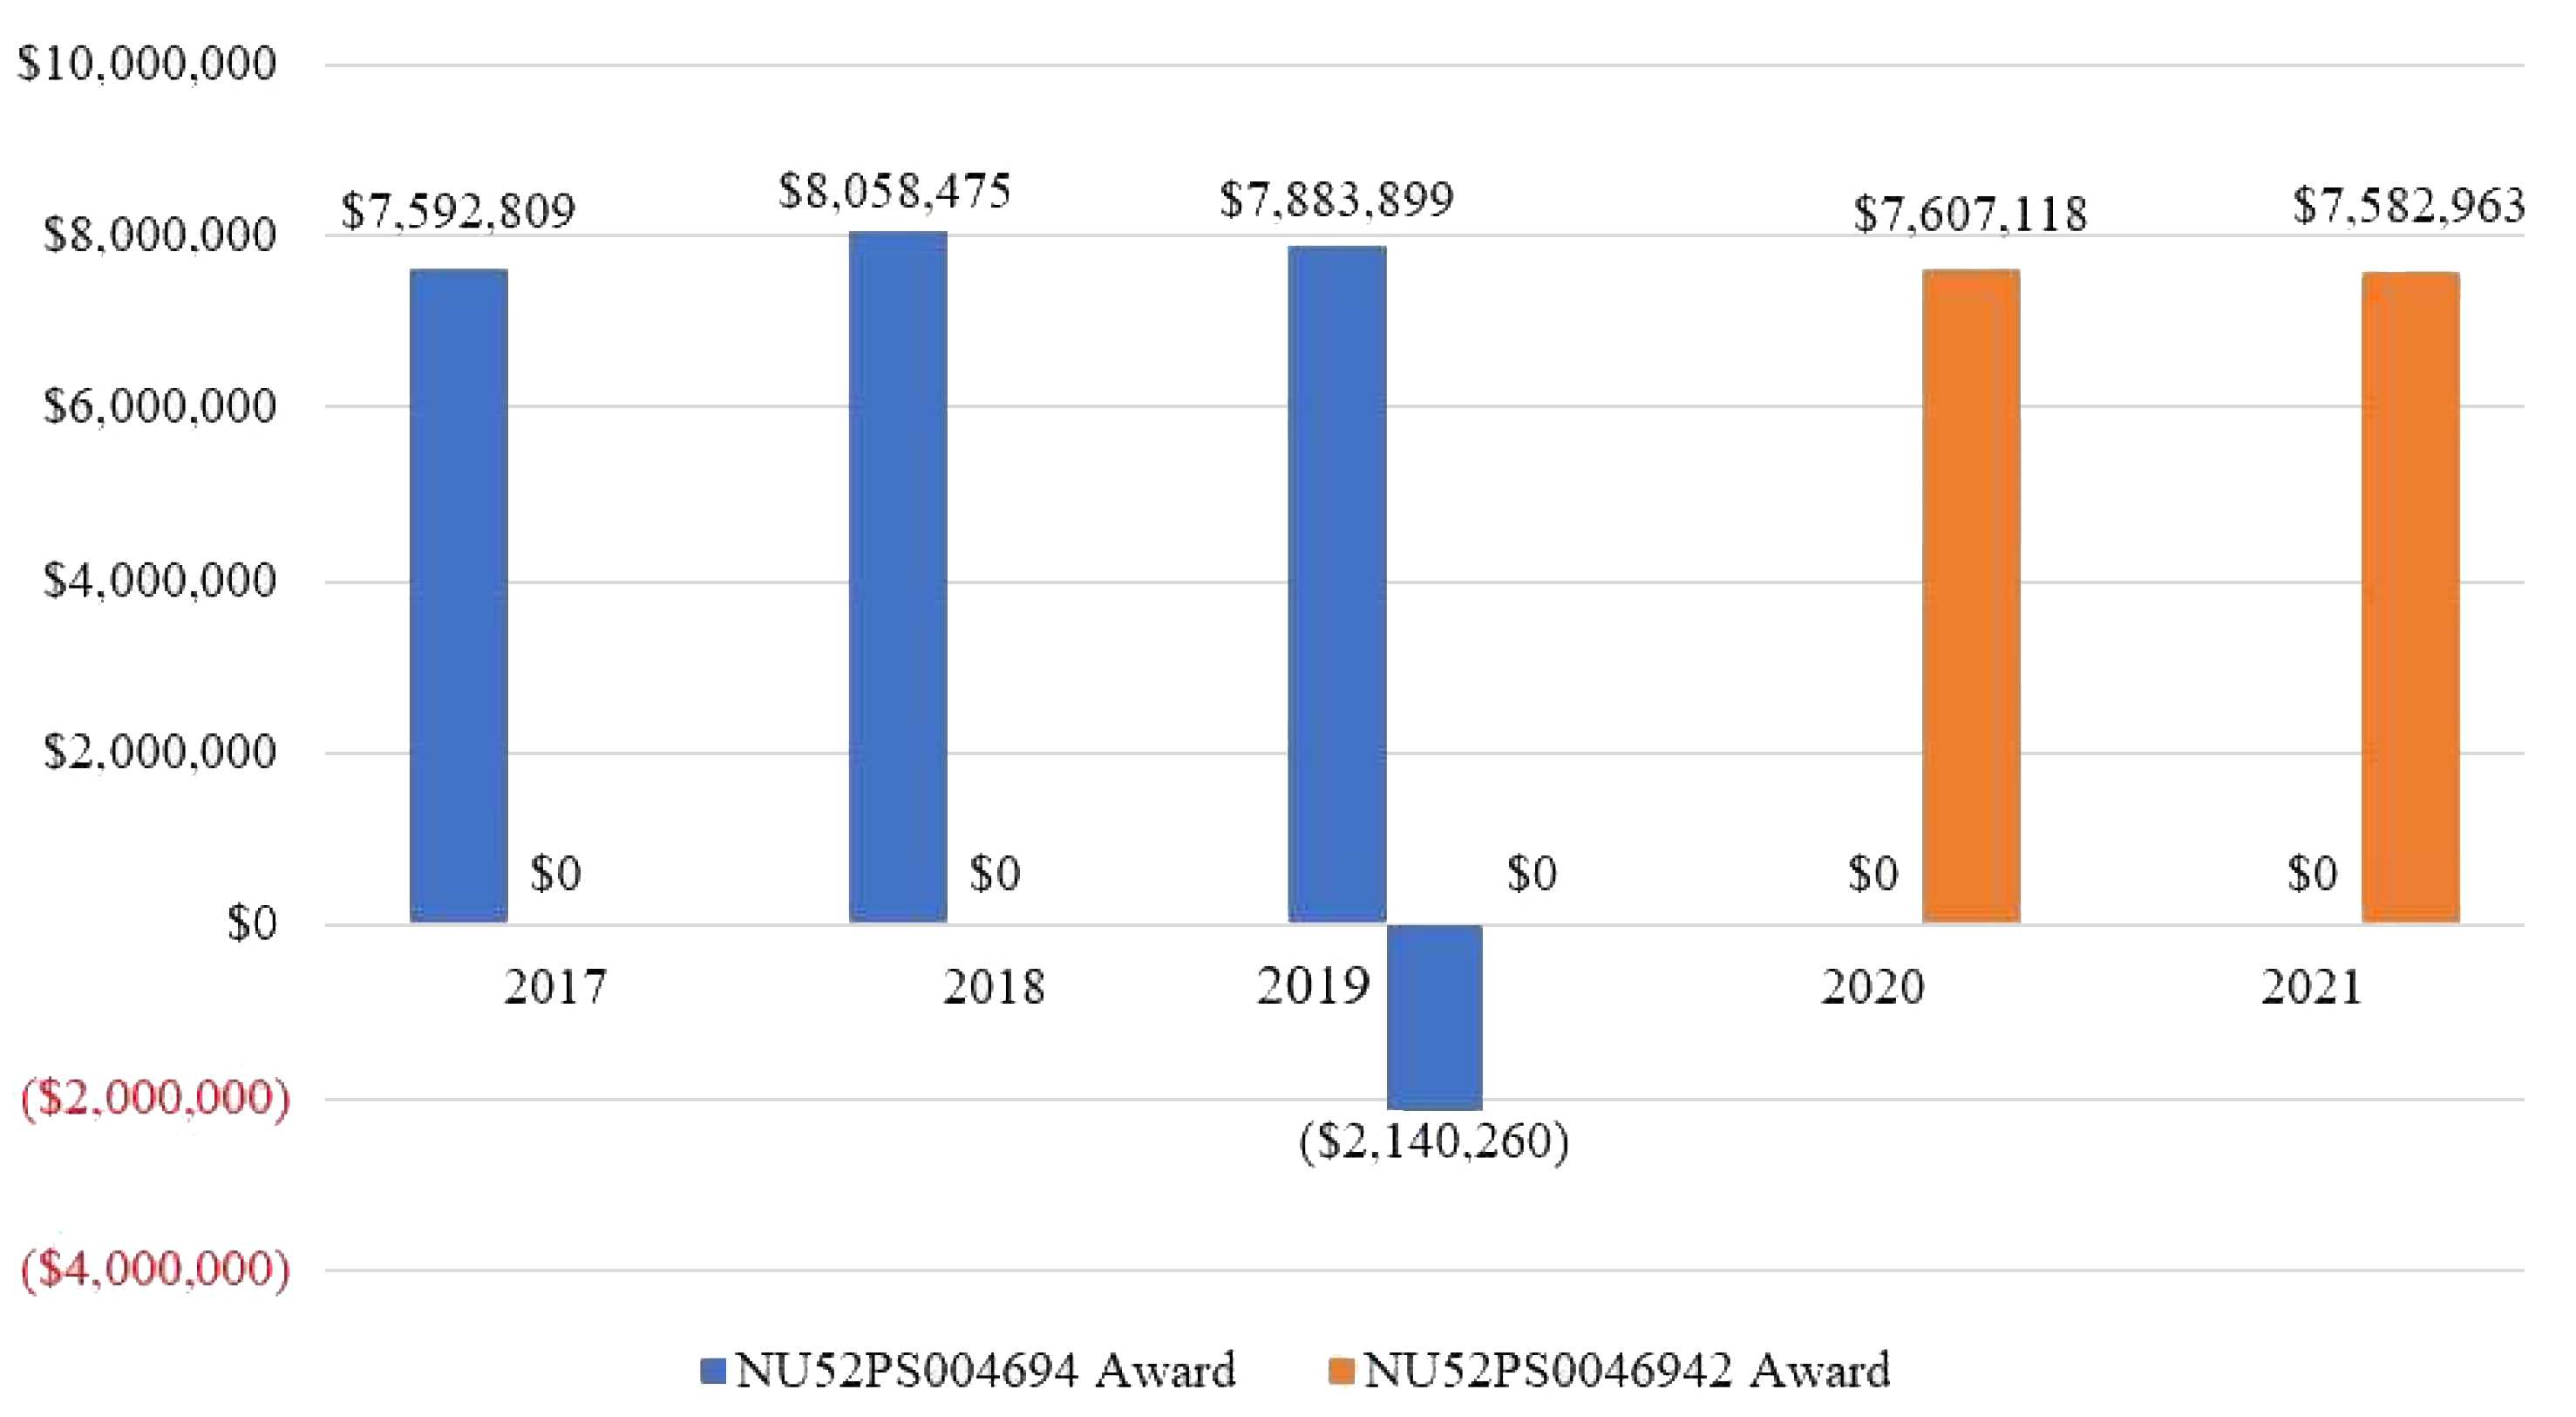 Chart of federal award funds from the years 2017 to 2021. In years 2017-2019, the NU52PS004694 award had a net $21,394,923 gain. In years 2020-2021, the NU52PS910188 award had a net $15,190,081 gain.